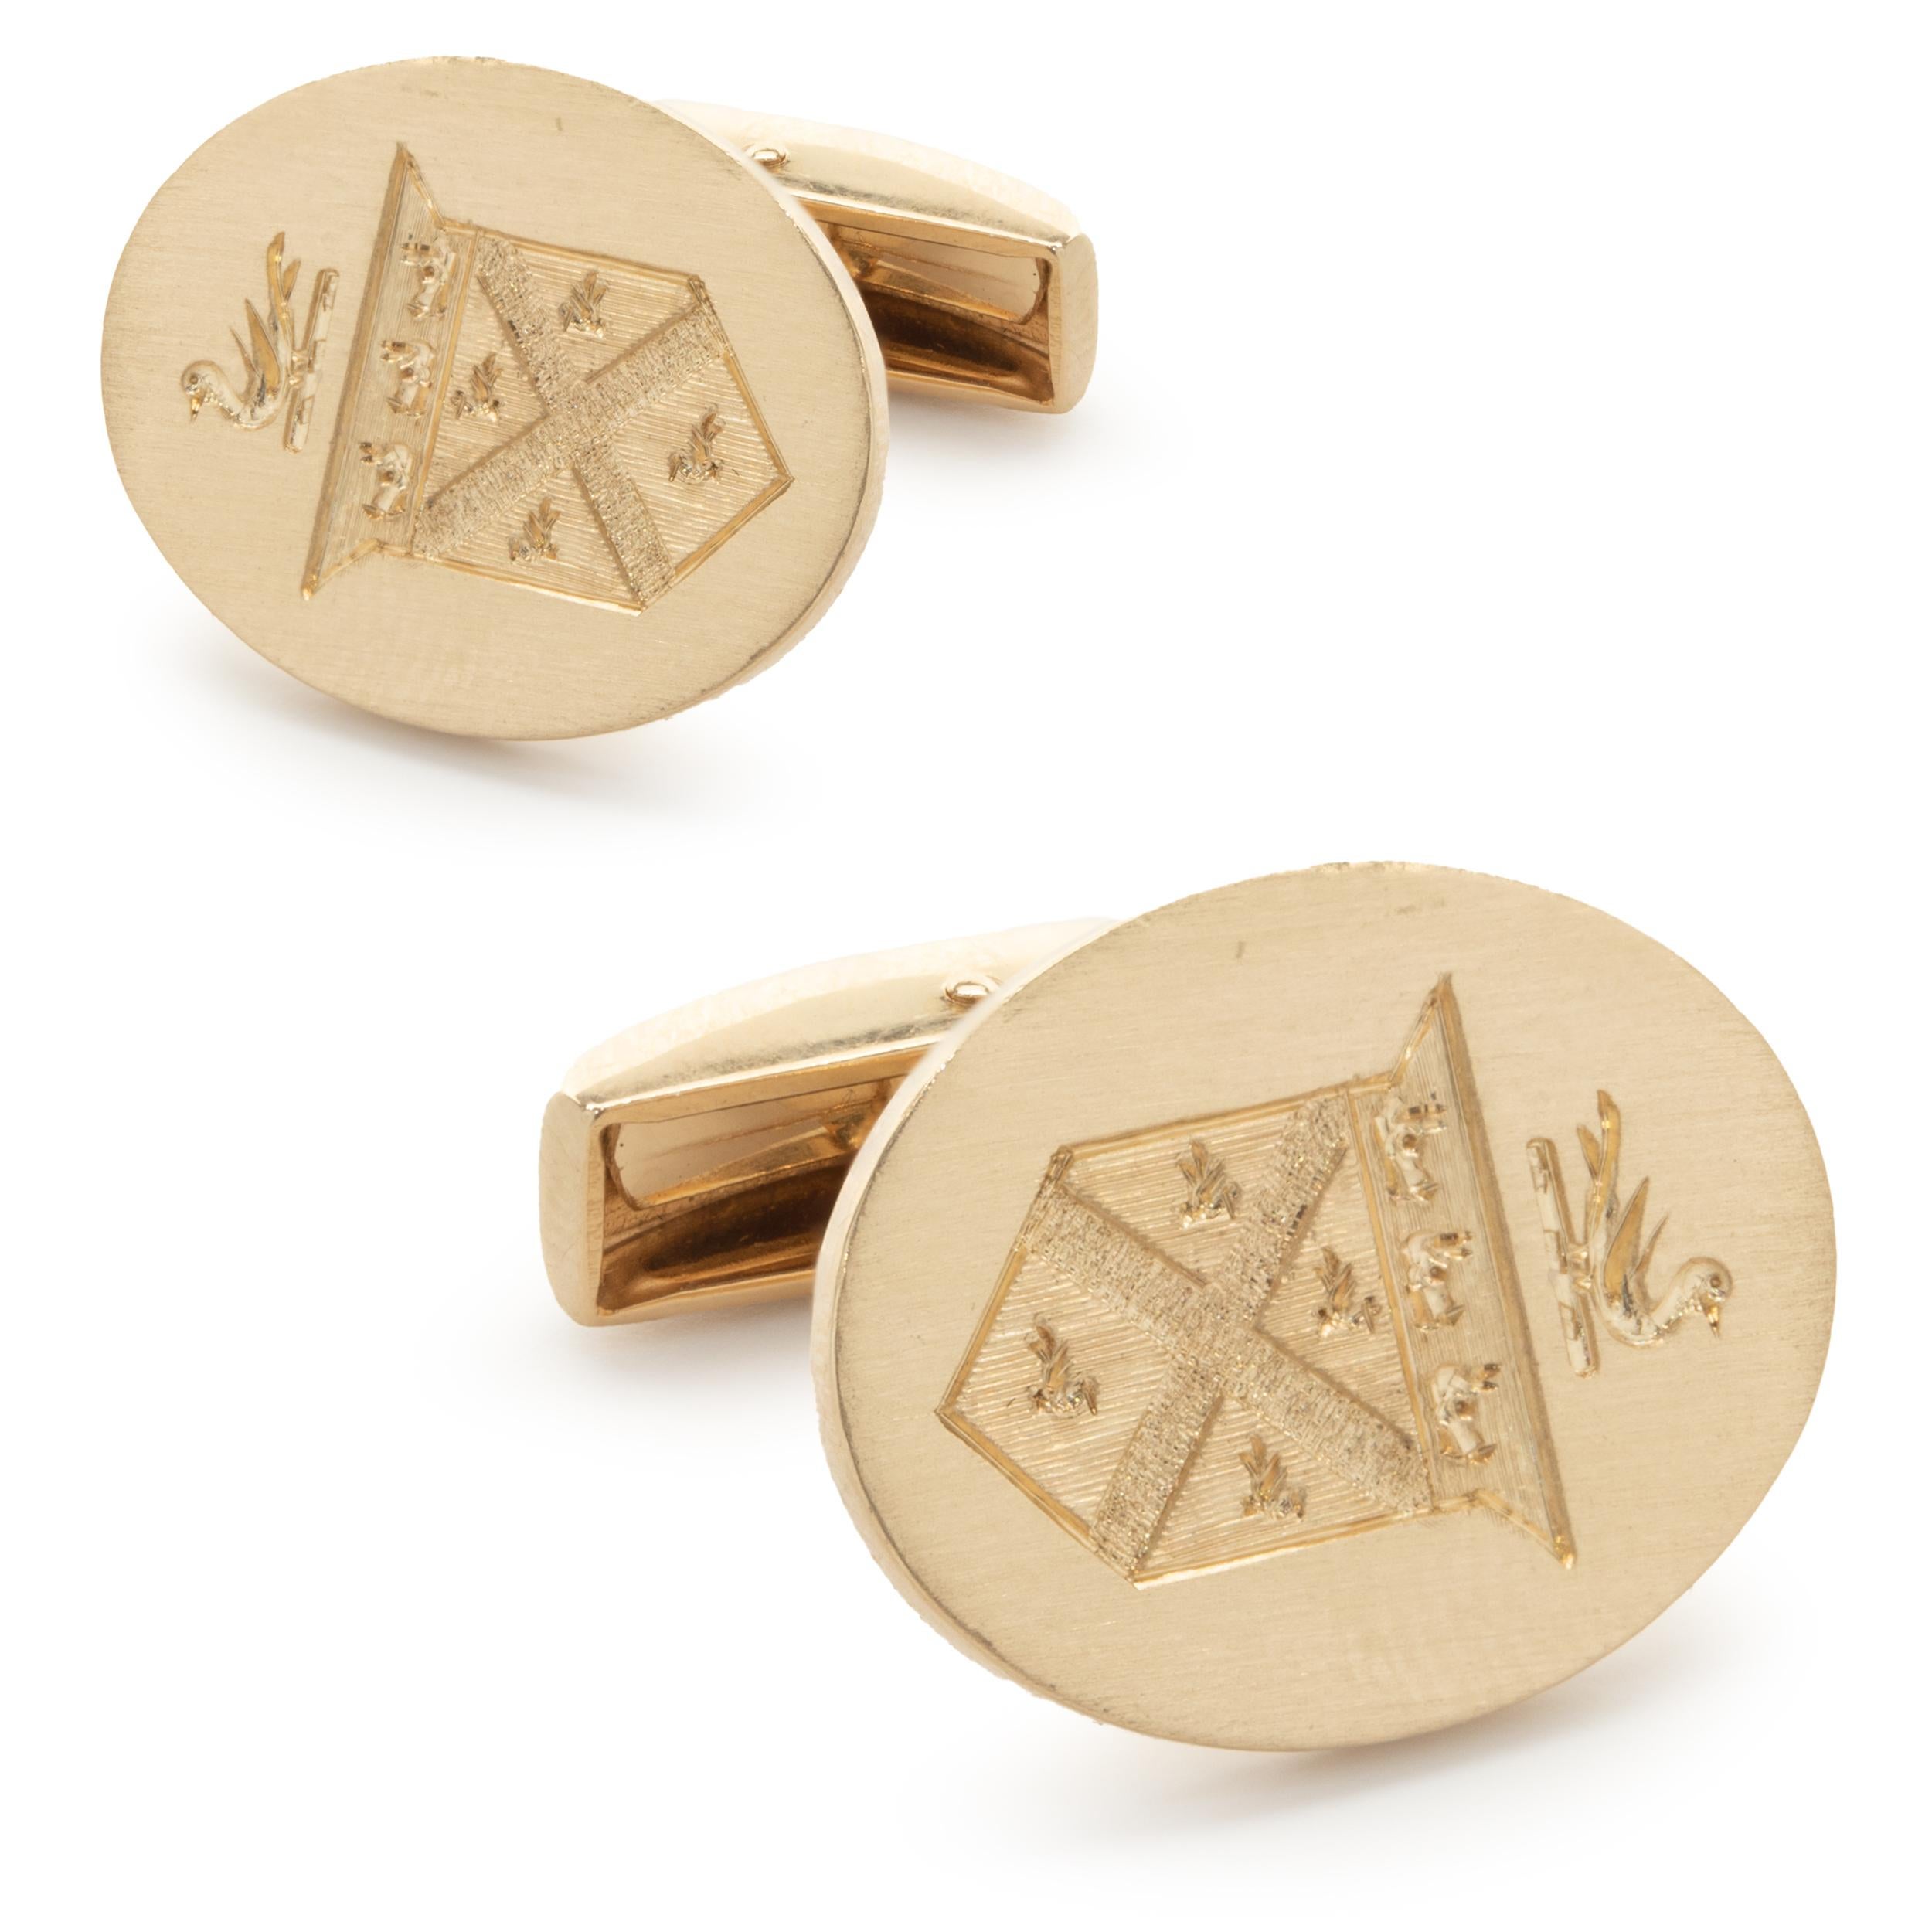 Material: 14K yellow gold
Dimensions: cufflinks measure 15.45 x 19.70mm 
Weight: 18.05 grams